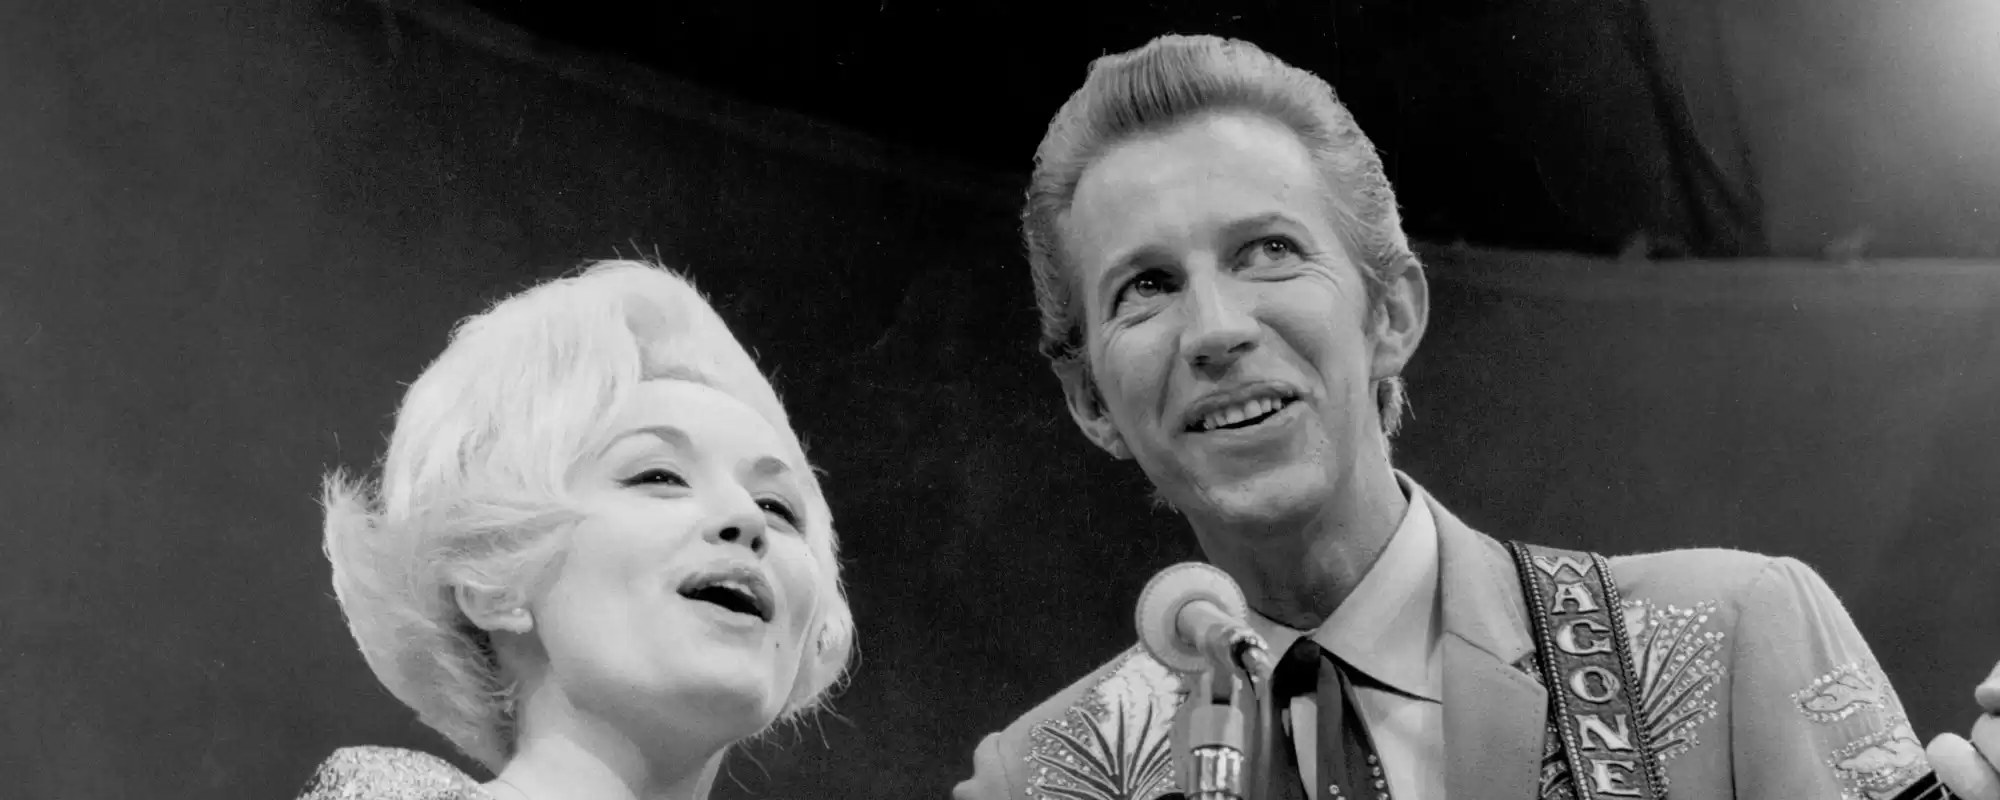 AI Generates Final Duet for Dolly Parton and Porter Wagoner - Here's the Result